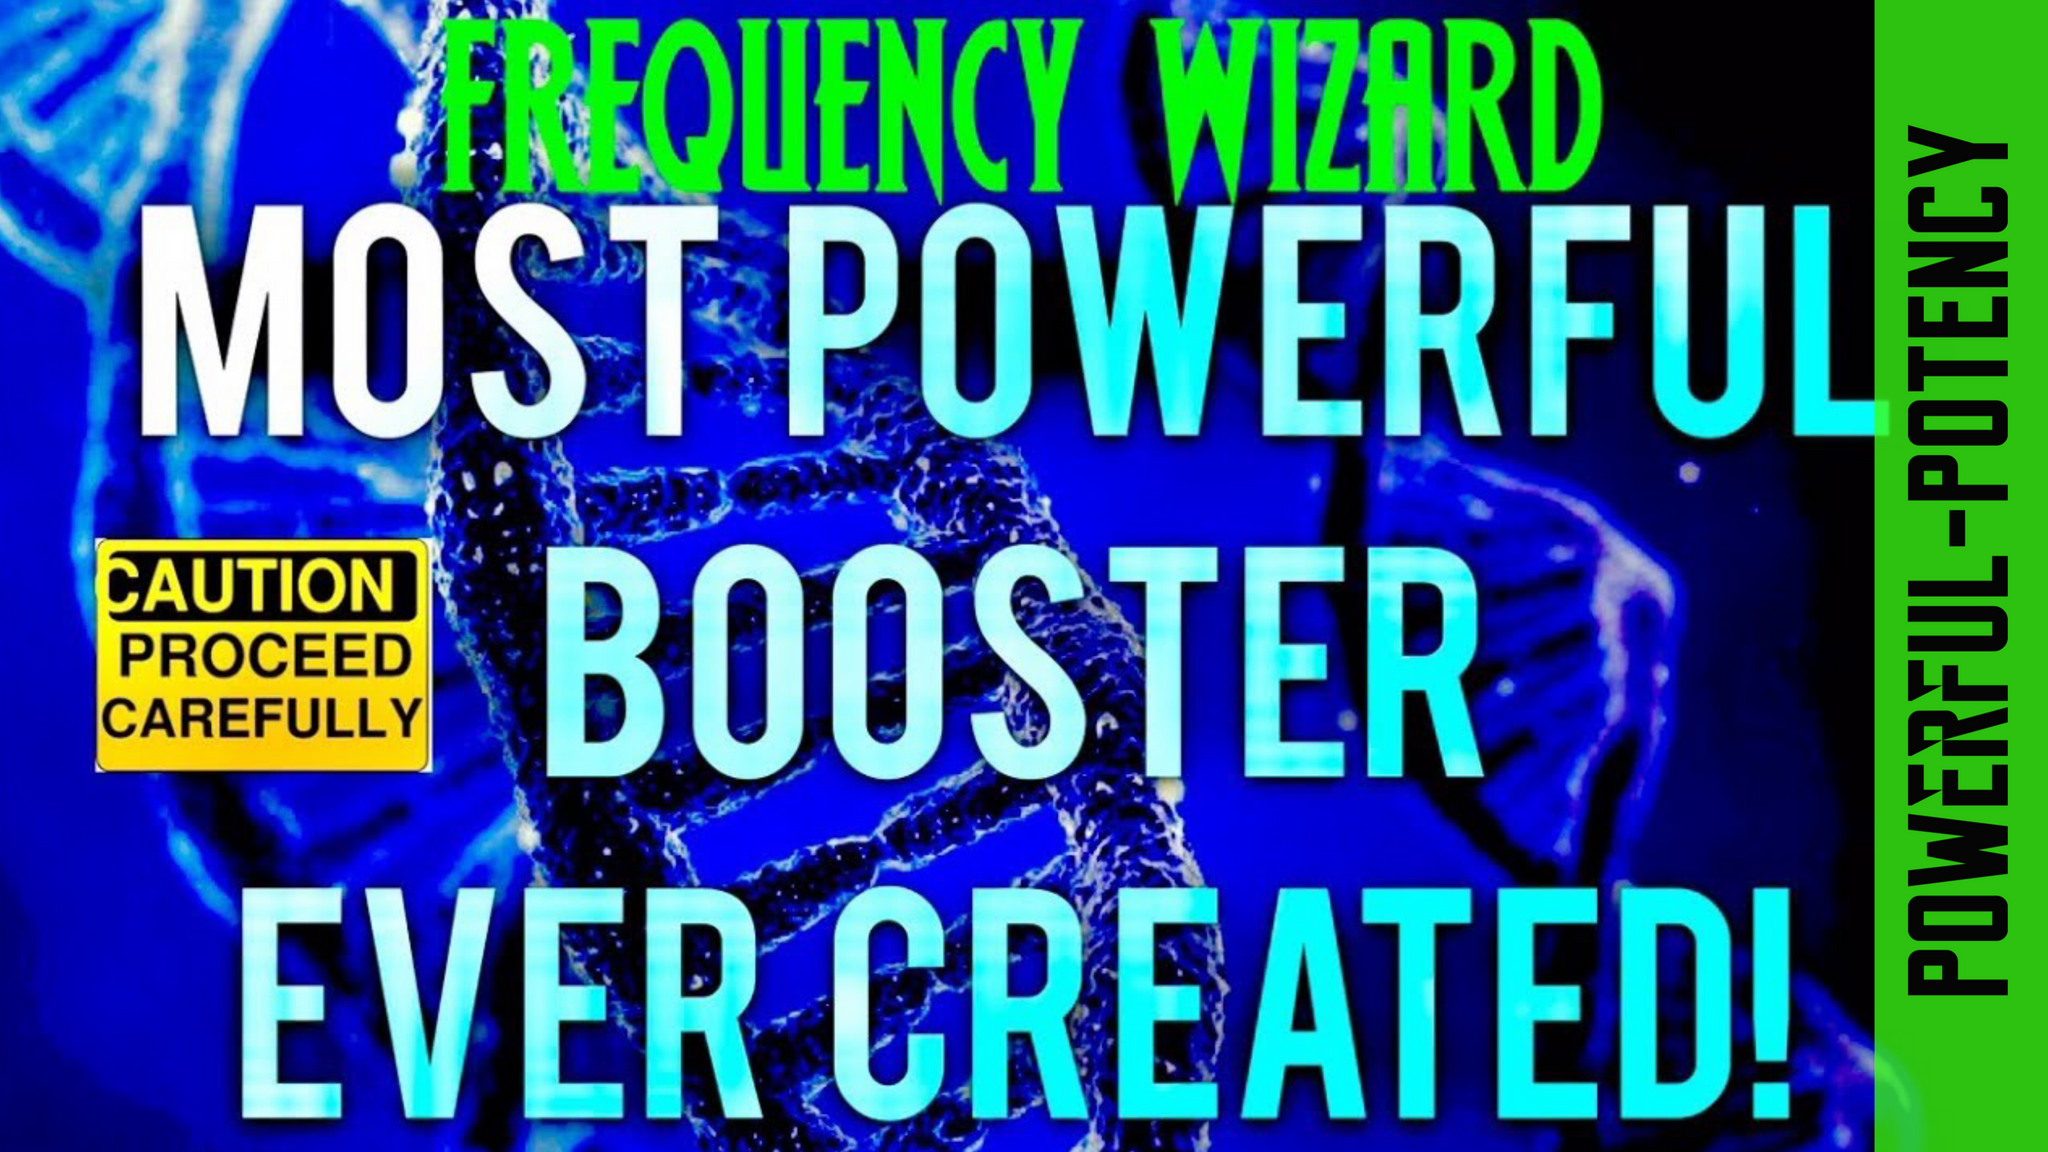 THE MOST POWERFUL BOOSTER EVER CREATED! CHANGE YOUR GENETICS SUPER BOOSTER! GET READY FOR CHANGES! FREQUENCY WIZARD